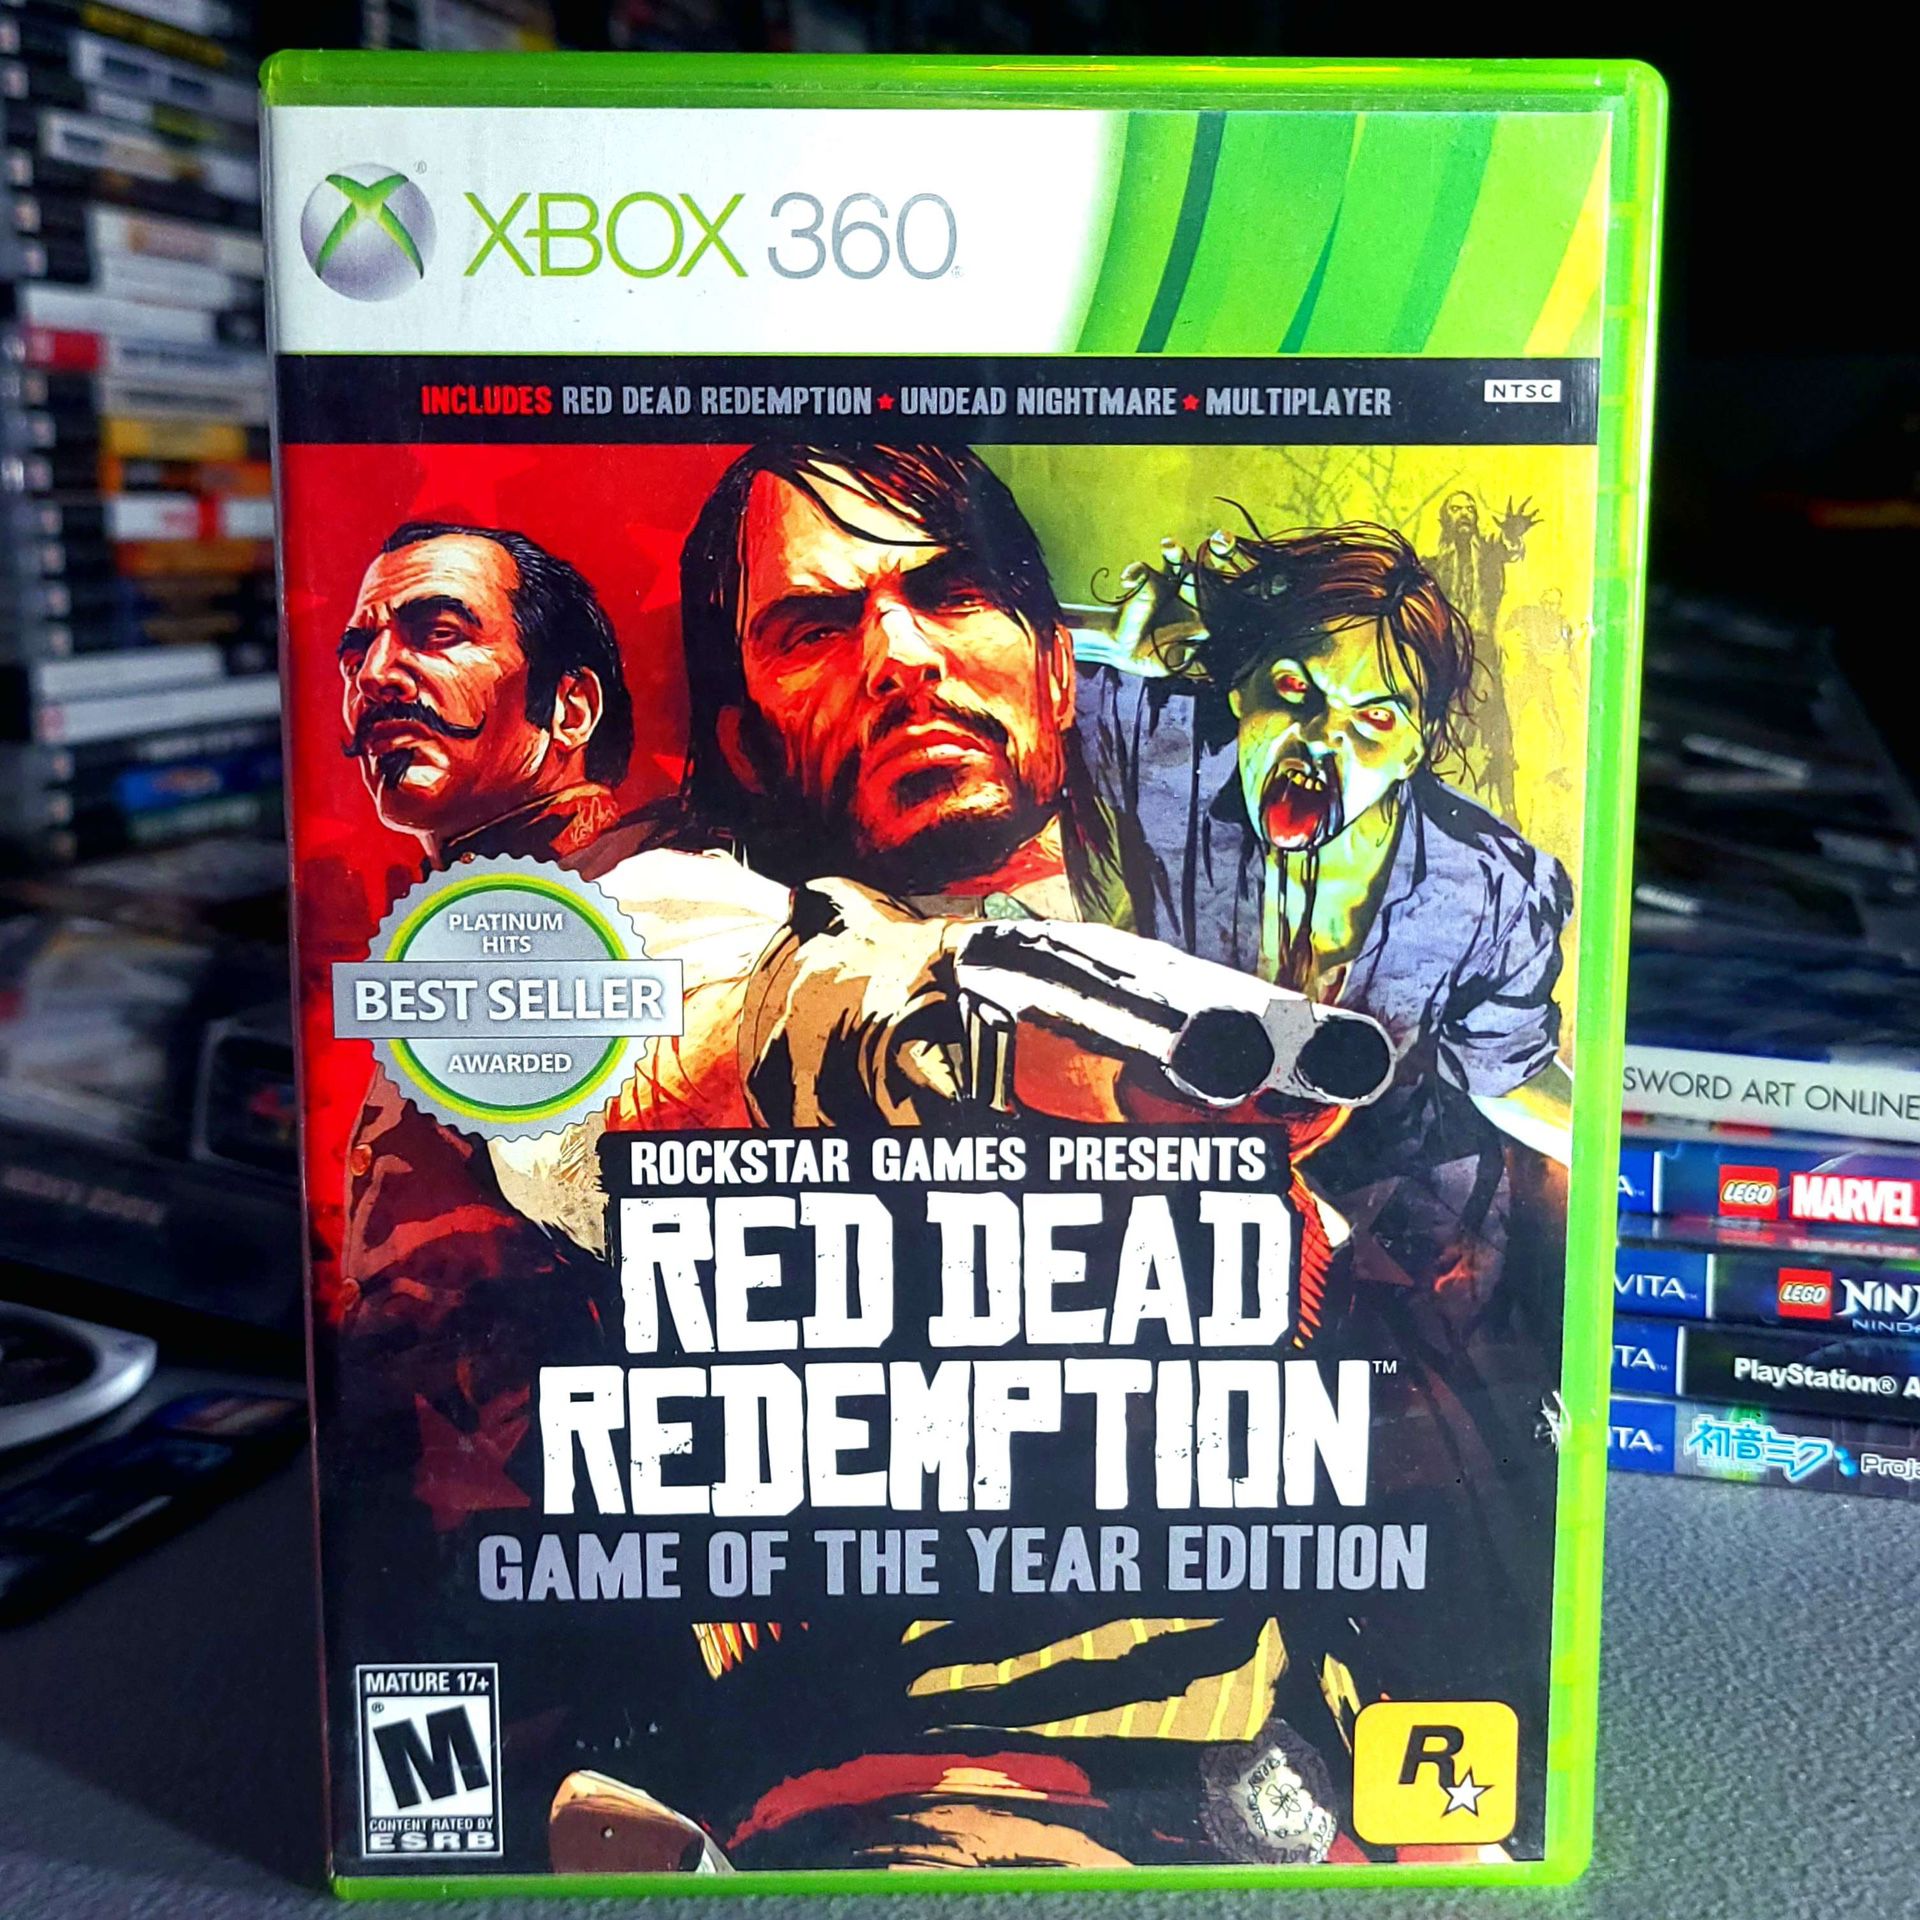 Red Dead Redemption Game of the Year Edition (Xbox 360, 2011)  *TRADE IN YOUR OLD GAMES FOR CSH OR CREDIT HERE/WE FIX SYSTEMS*